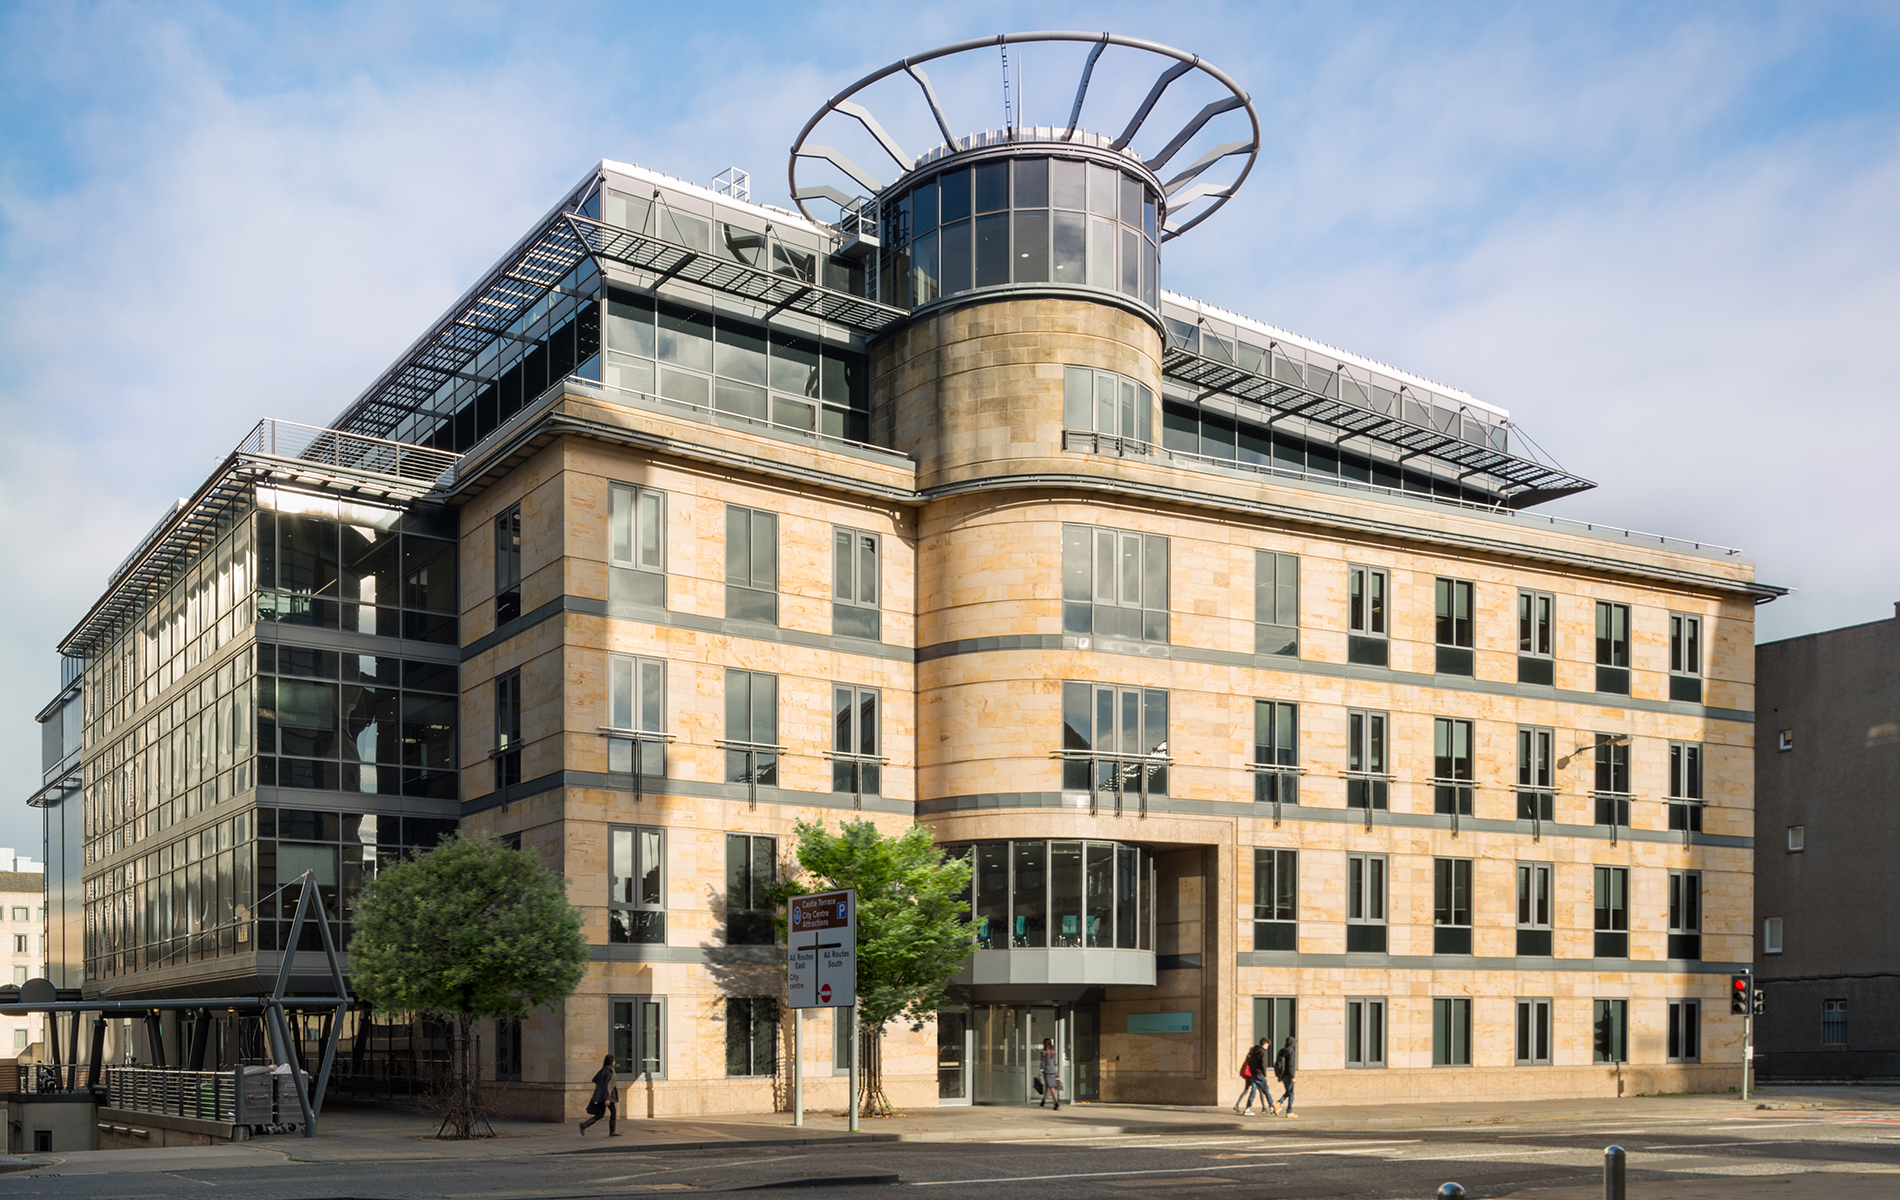 Extension planned at Edinburgh One as building changes hands